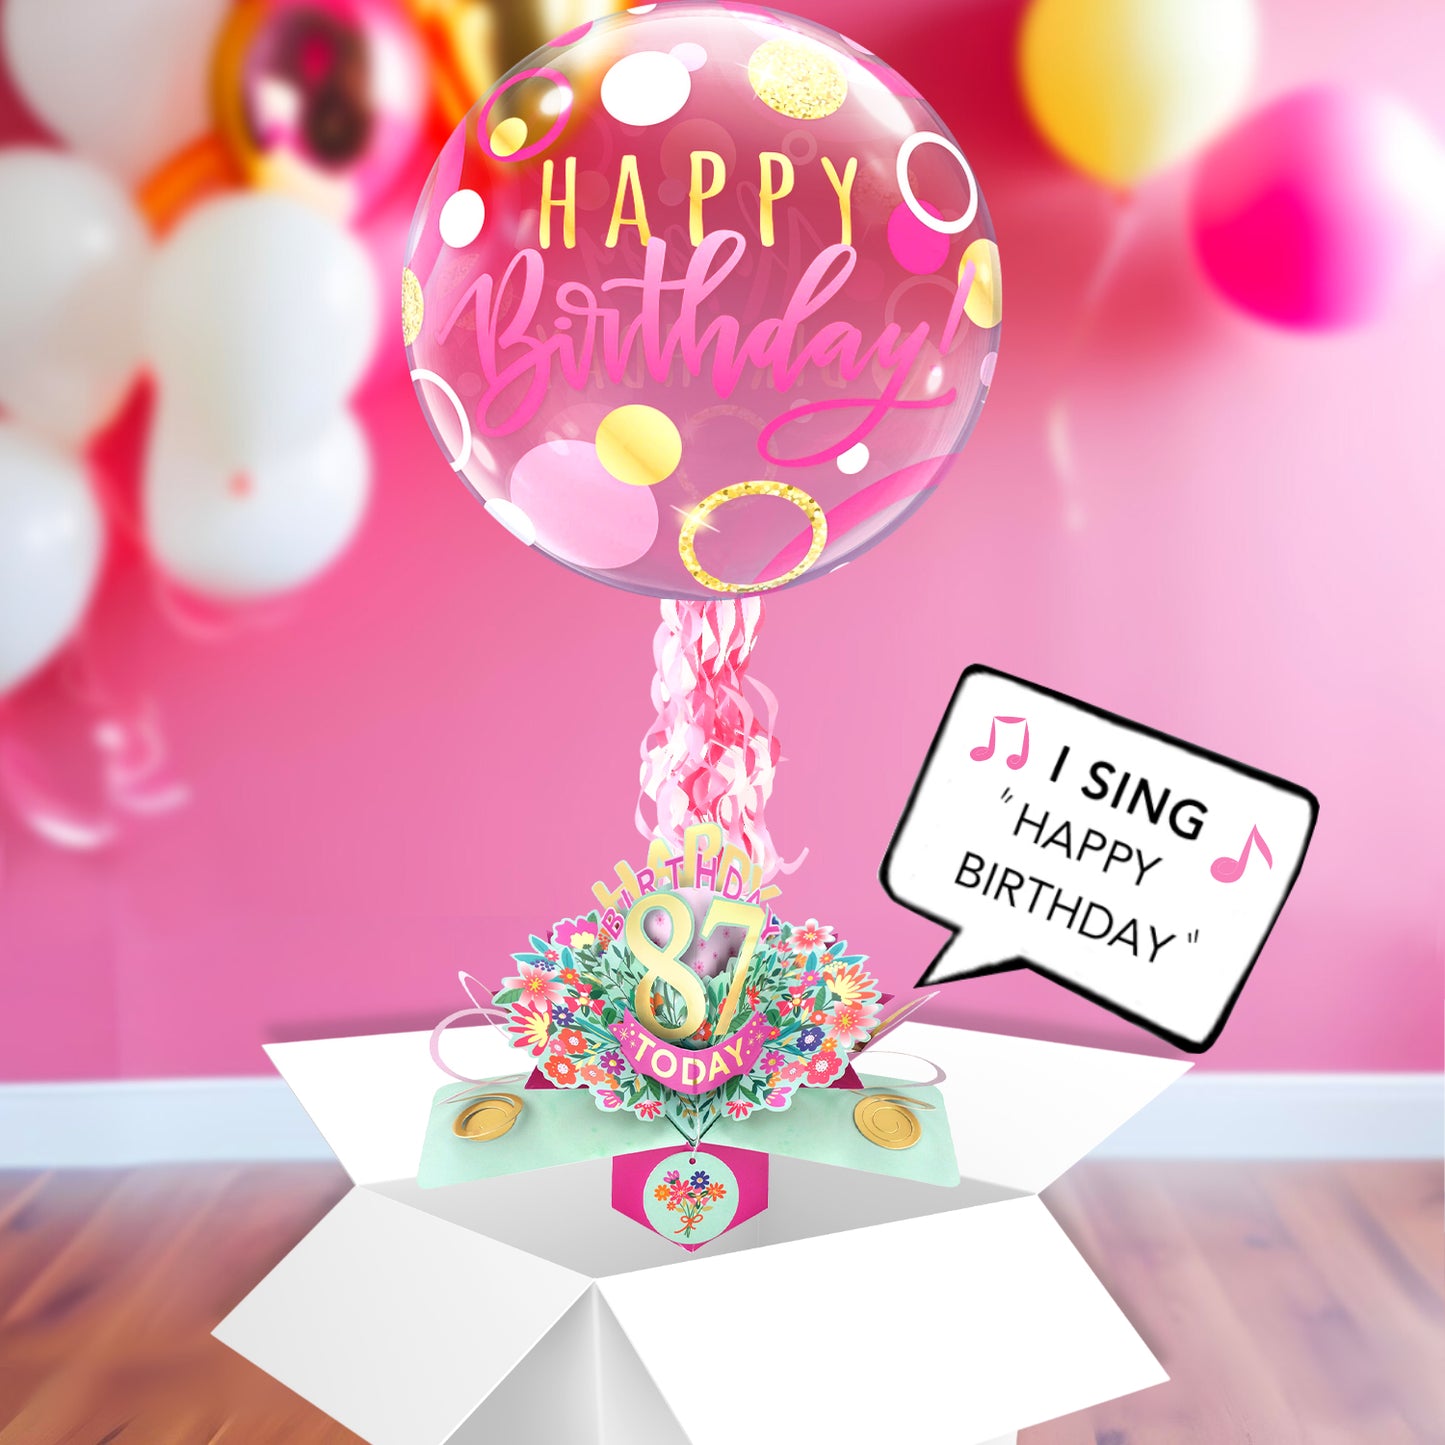 87th Birthday Pop Up Card & Musical Balloon Surprise Delivered In A Box For Her